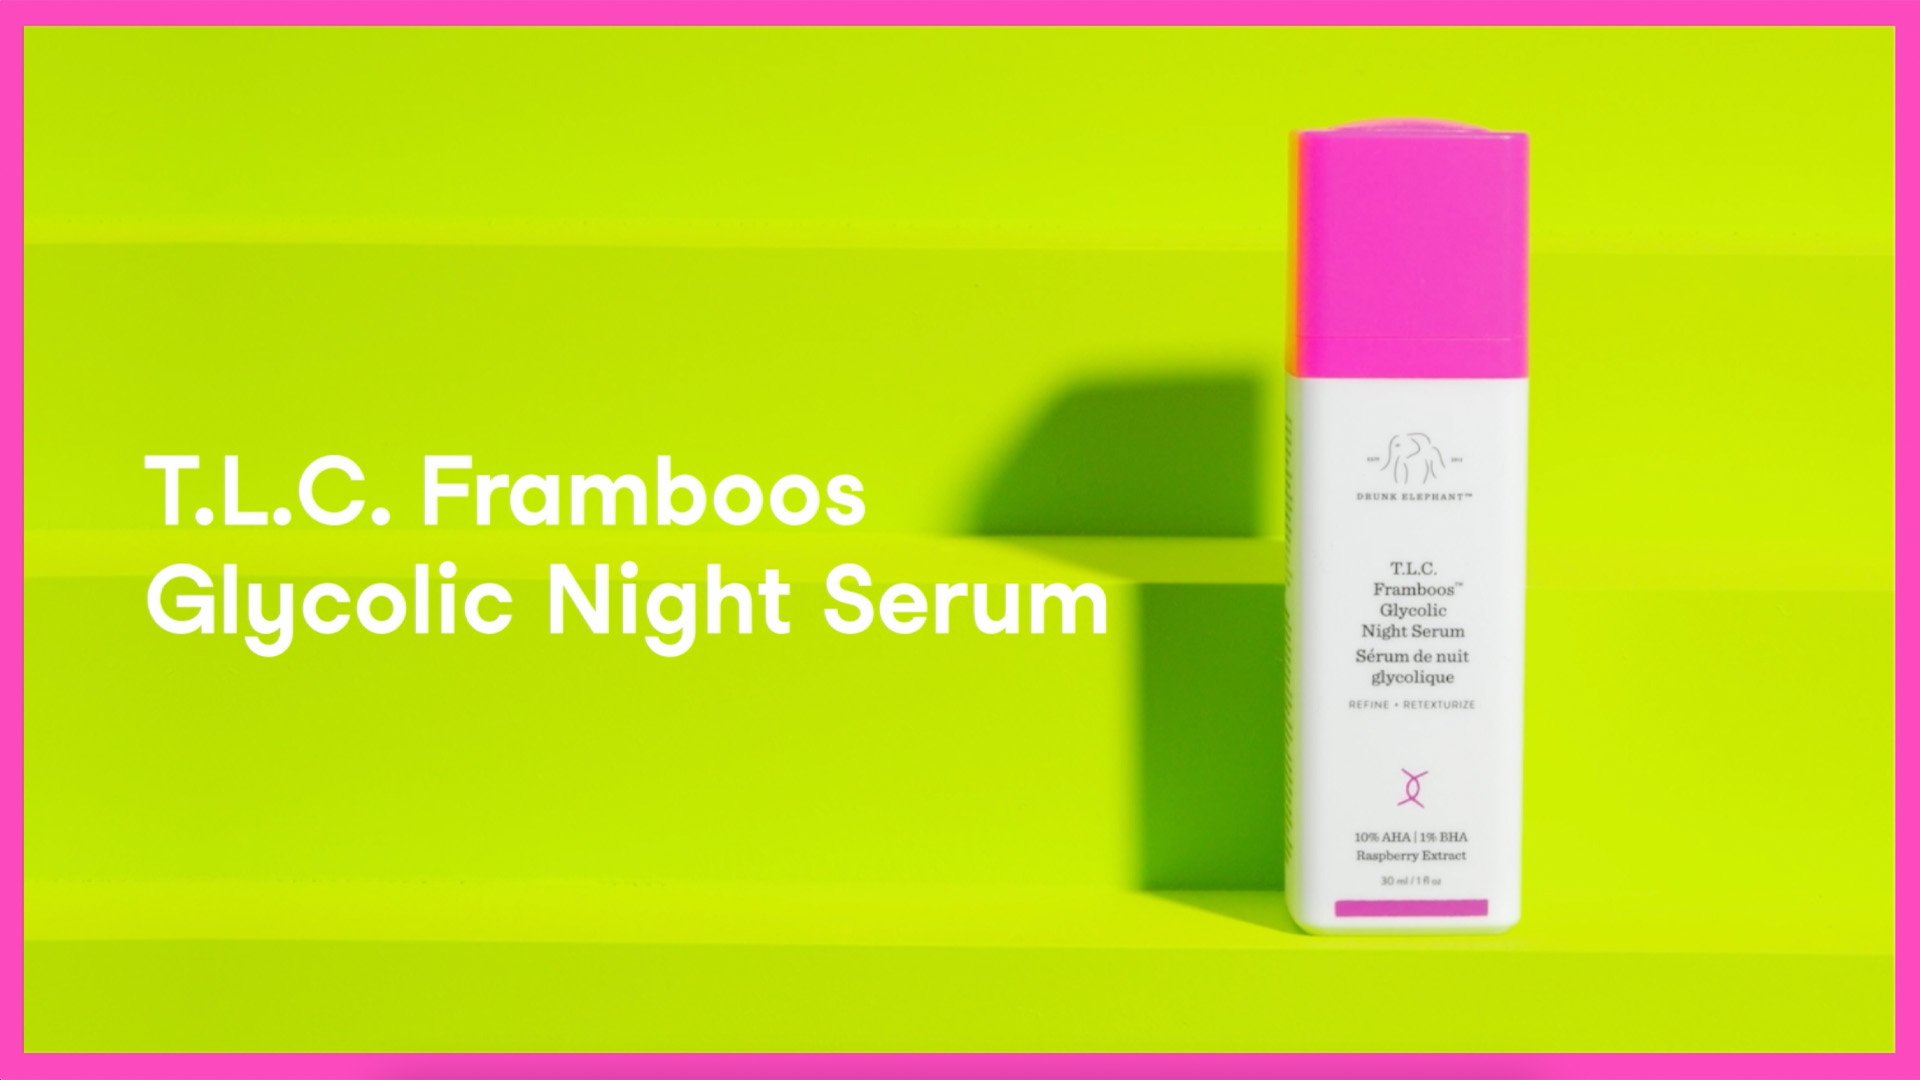 T.L.C. Framboos™ Glycolic Night Serum how to video. Blue background. Copy on image says 